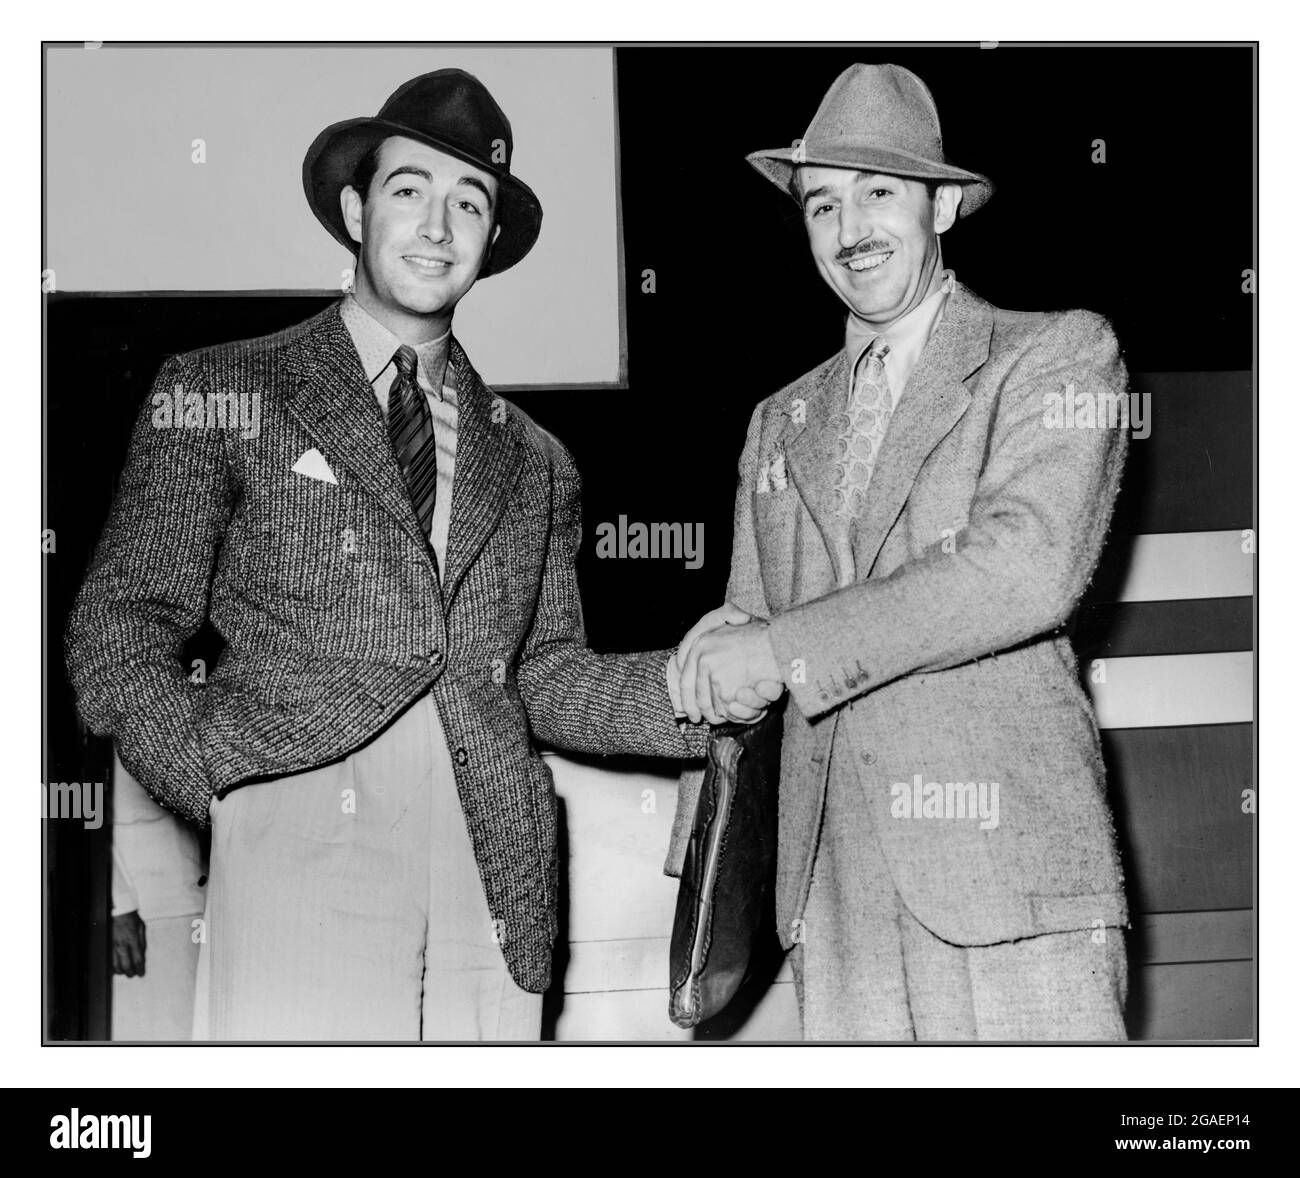 Archive image Walt Disney shakes hands with American Hollywood actor Robert Taylor, three-quarter length portraits] / World-Telegram photo by Alan Fisher. Creator(s): Fisher, Alan, photographer Date Created/Published: 1938. Stock Photo